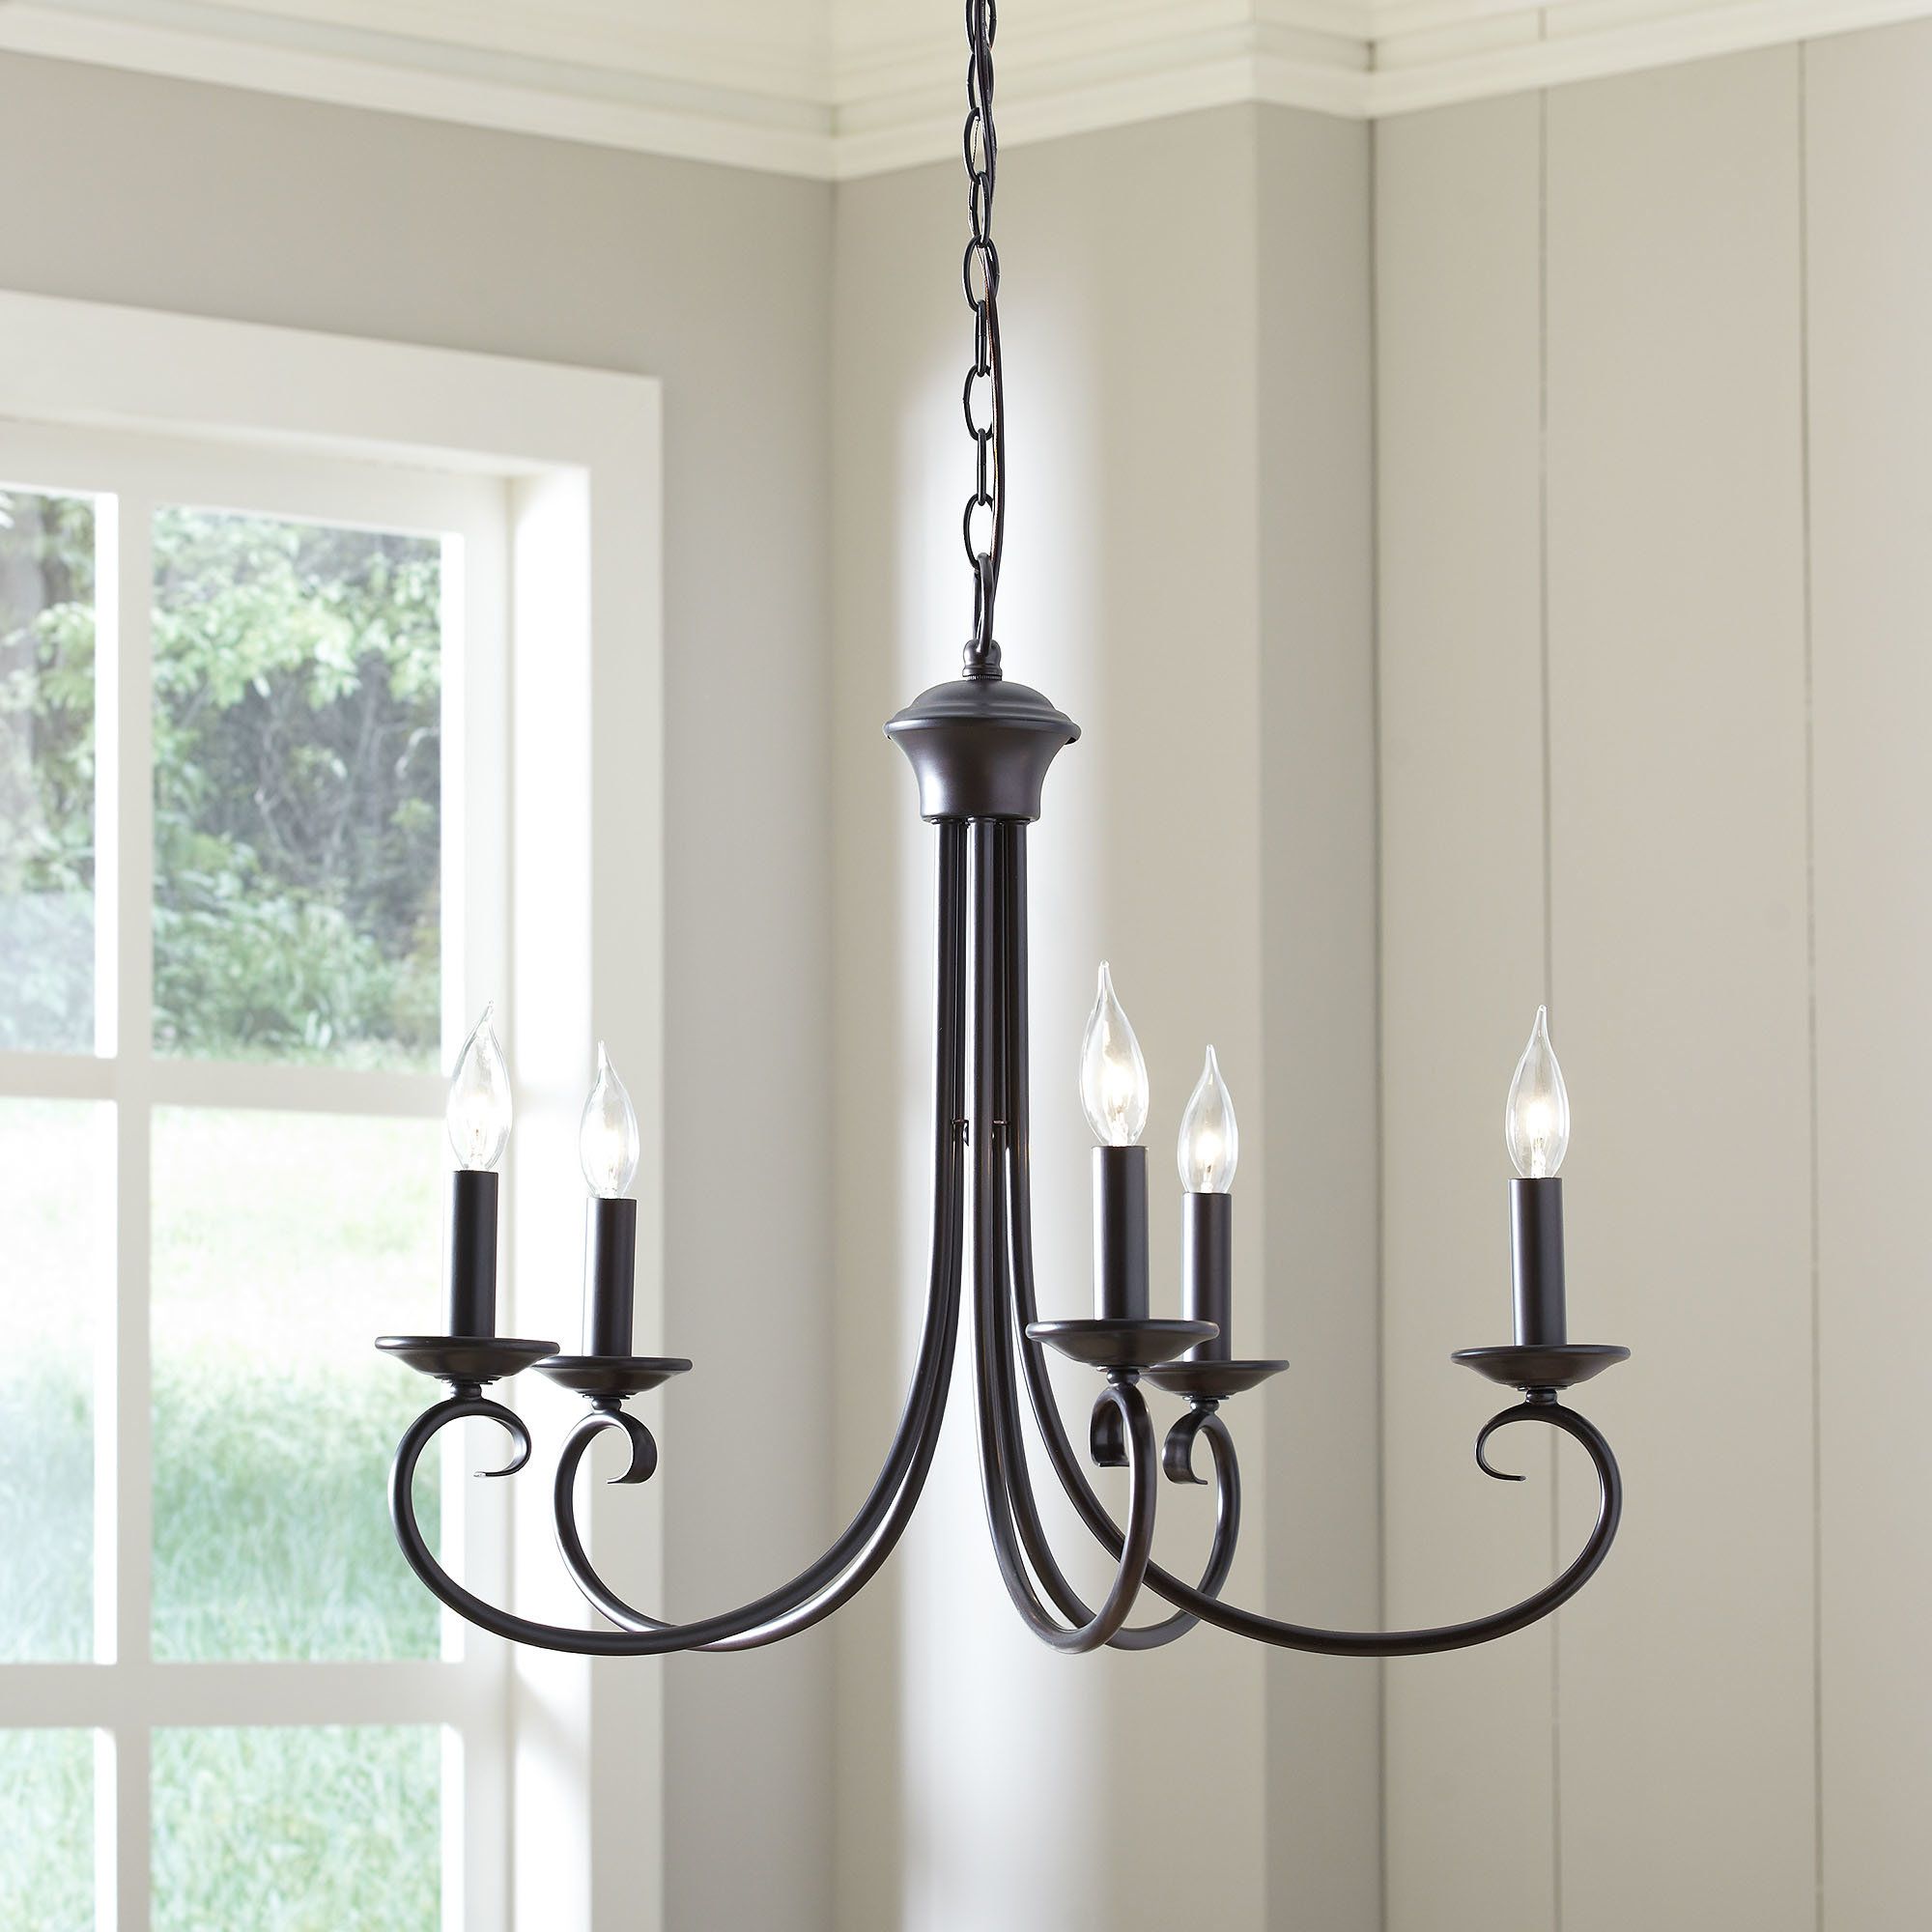 Edgell 5 Light Candle Style Chandelier Pertaining To Shaylee 5 Light Candle Style Chandeliers (View 7 of 30)